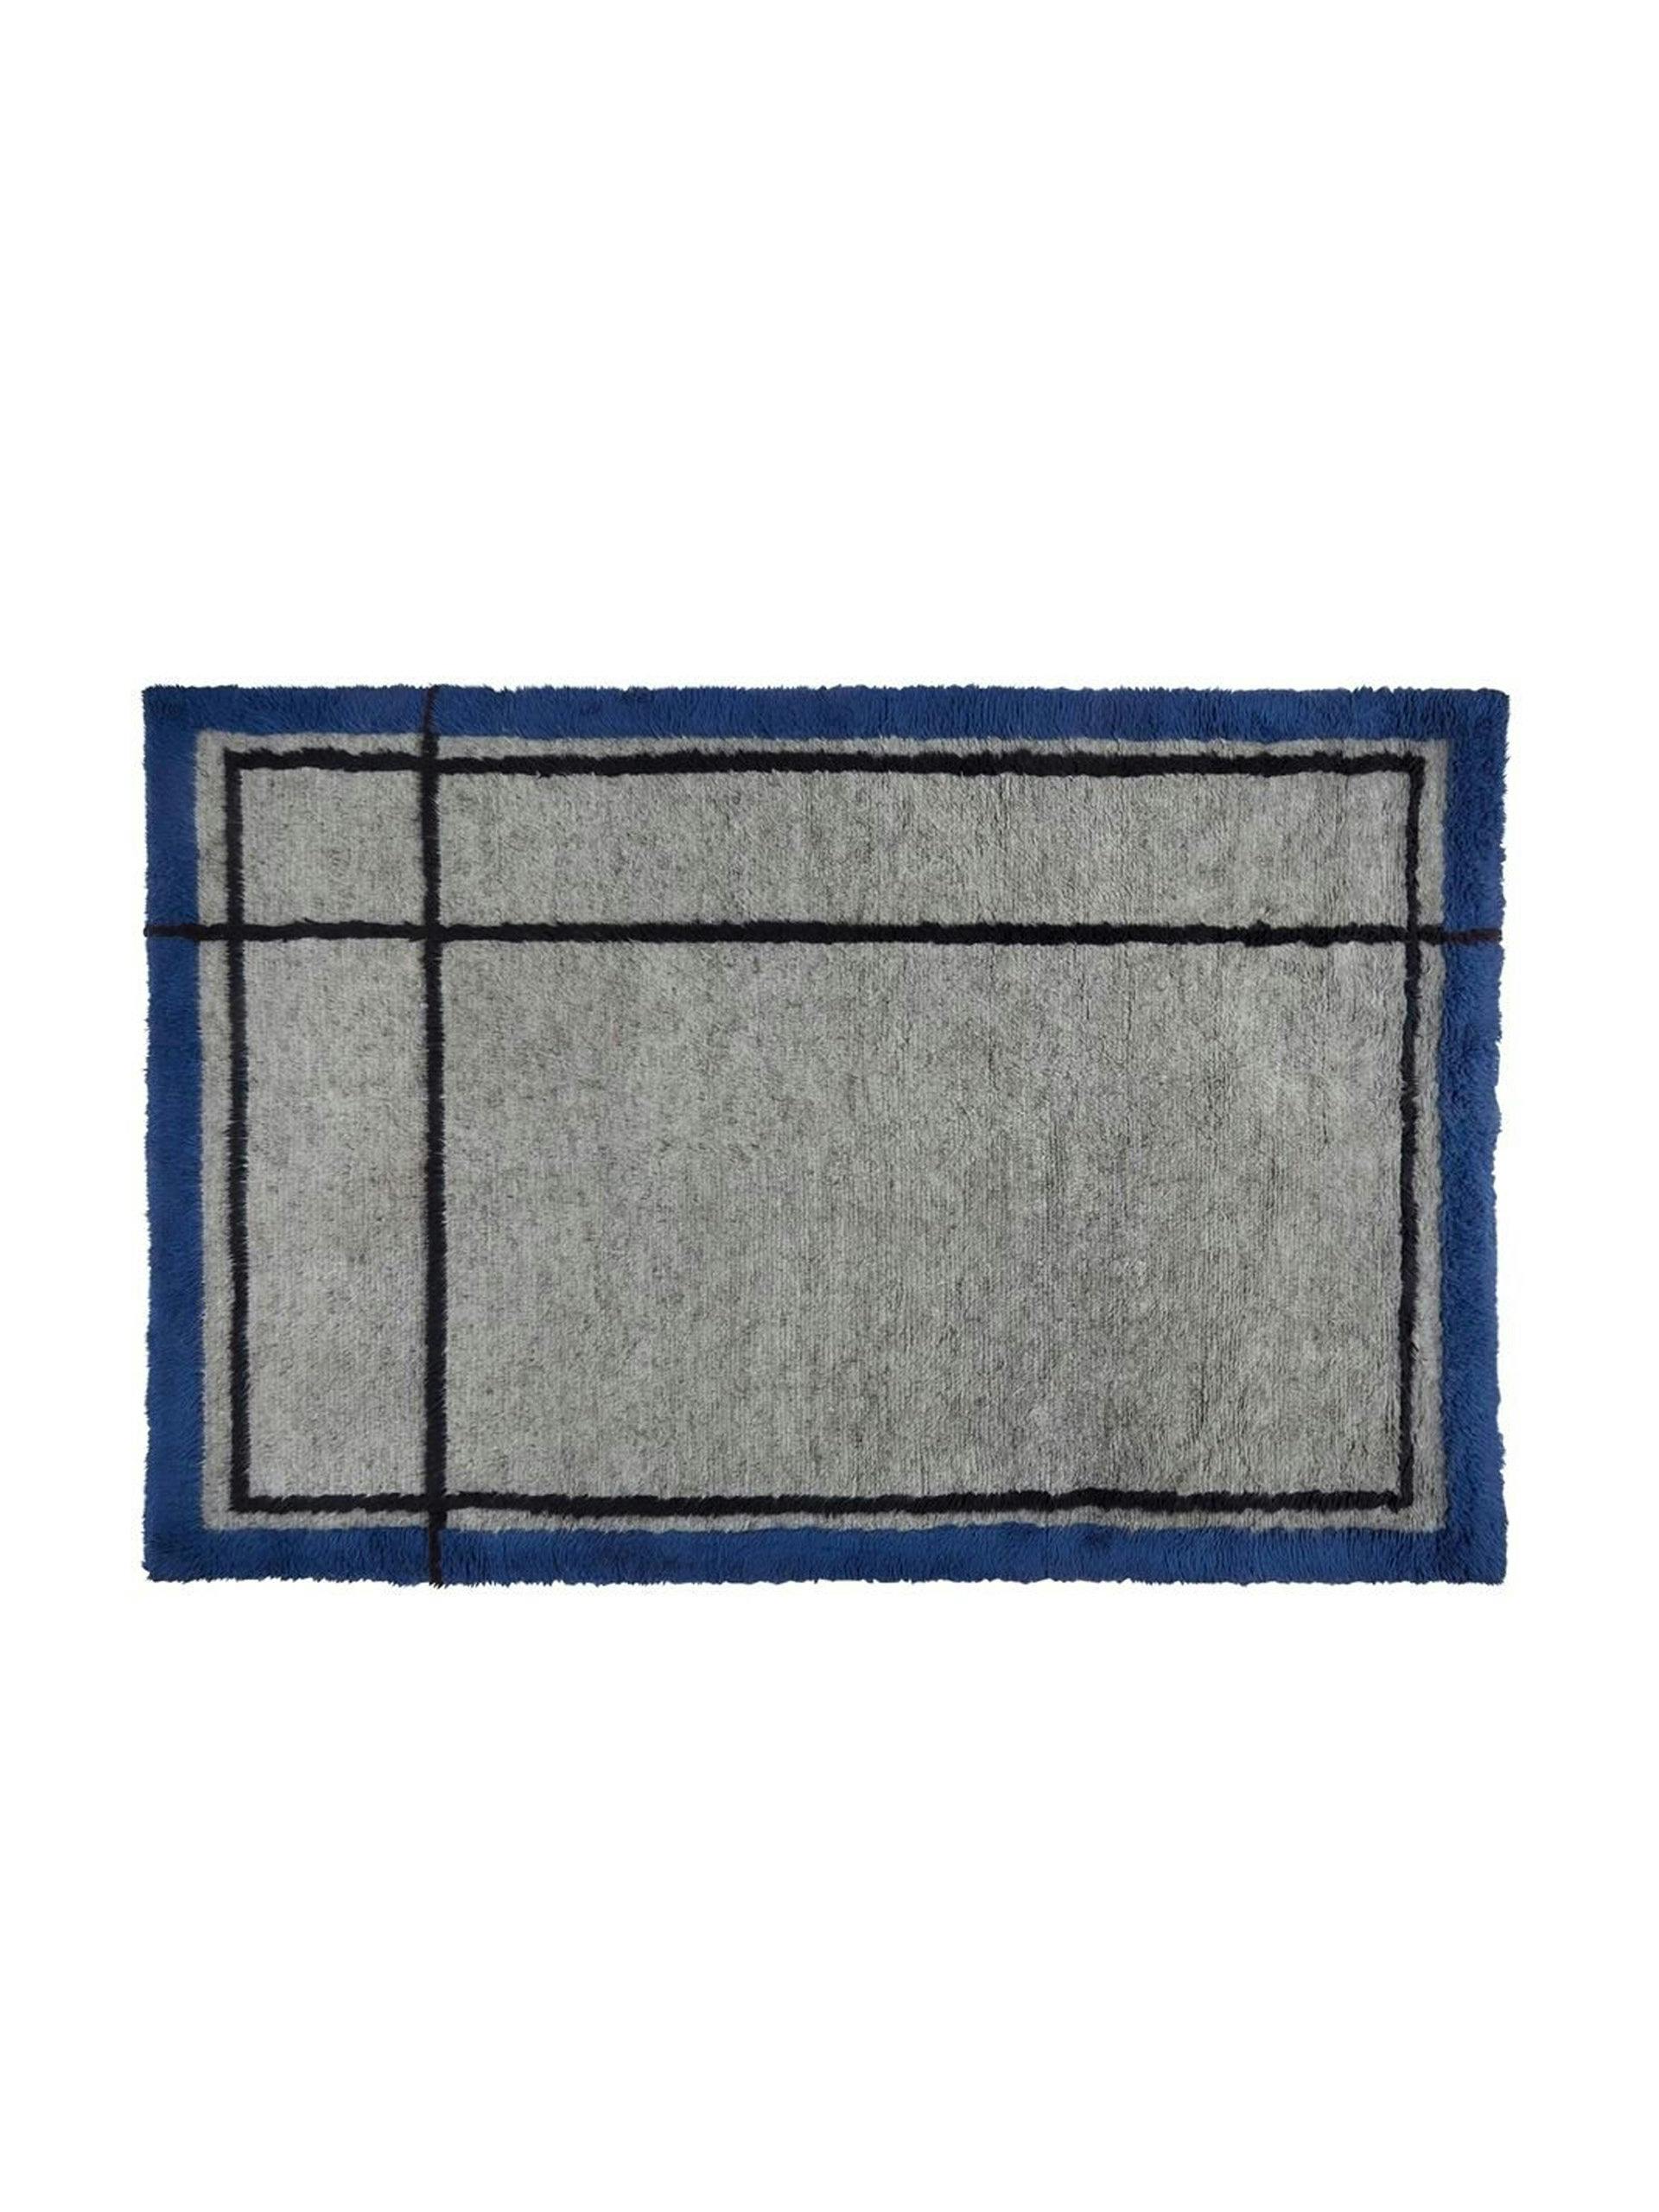 Grey and blue abstract rug